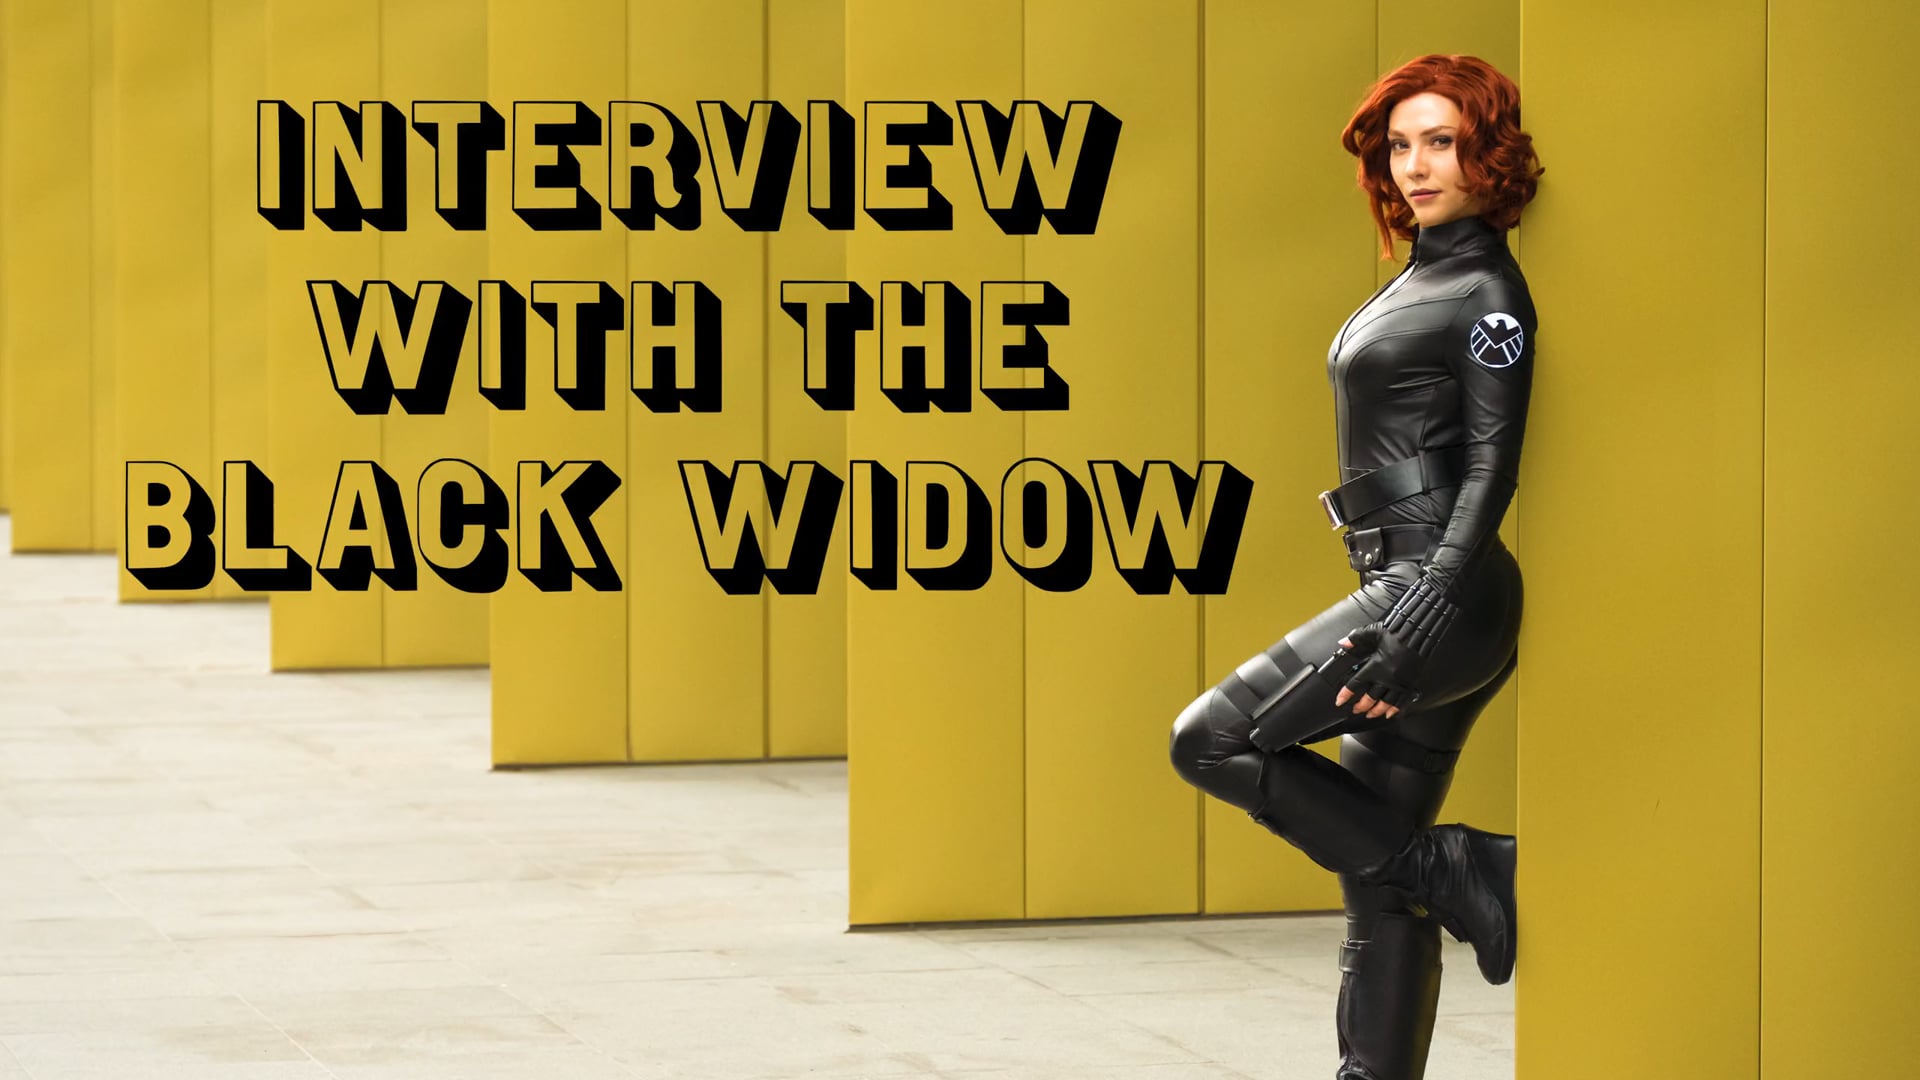 Interview with the Black Widow